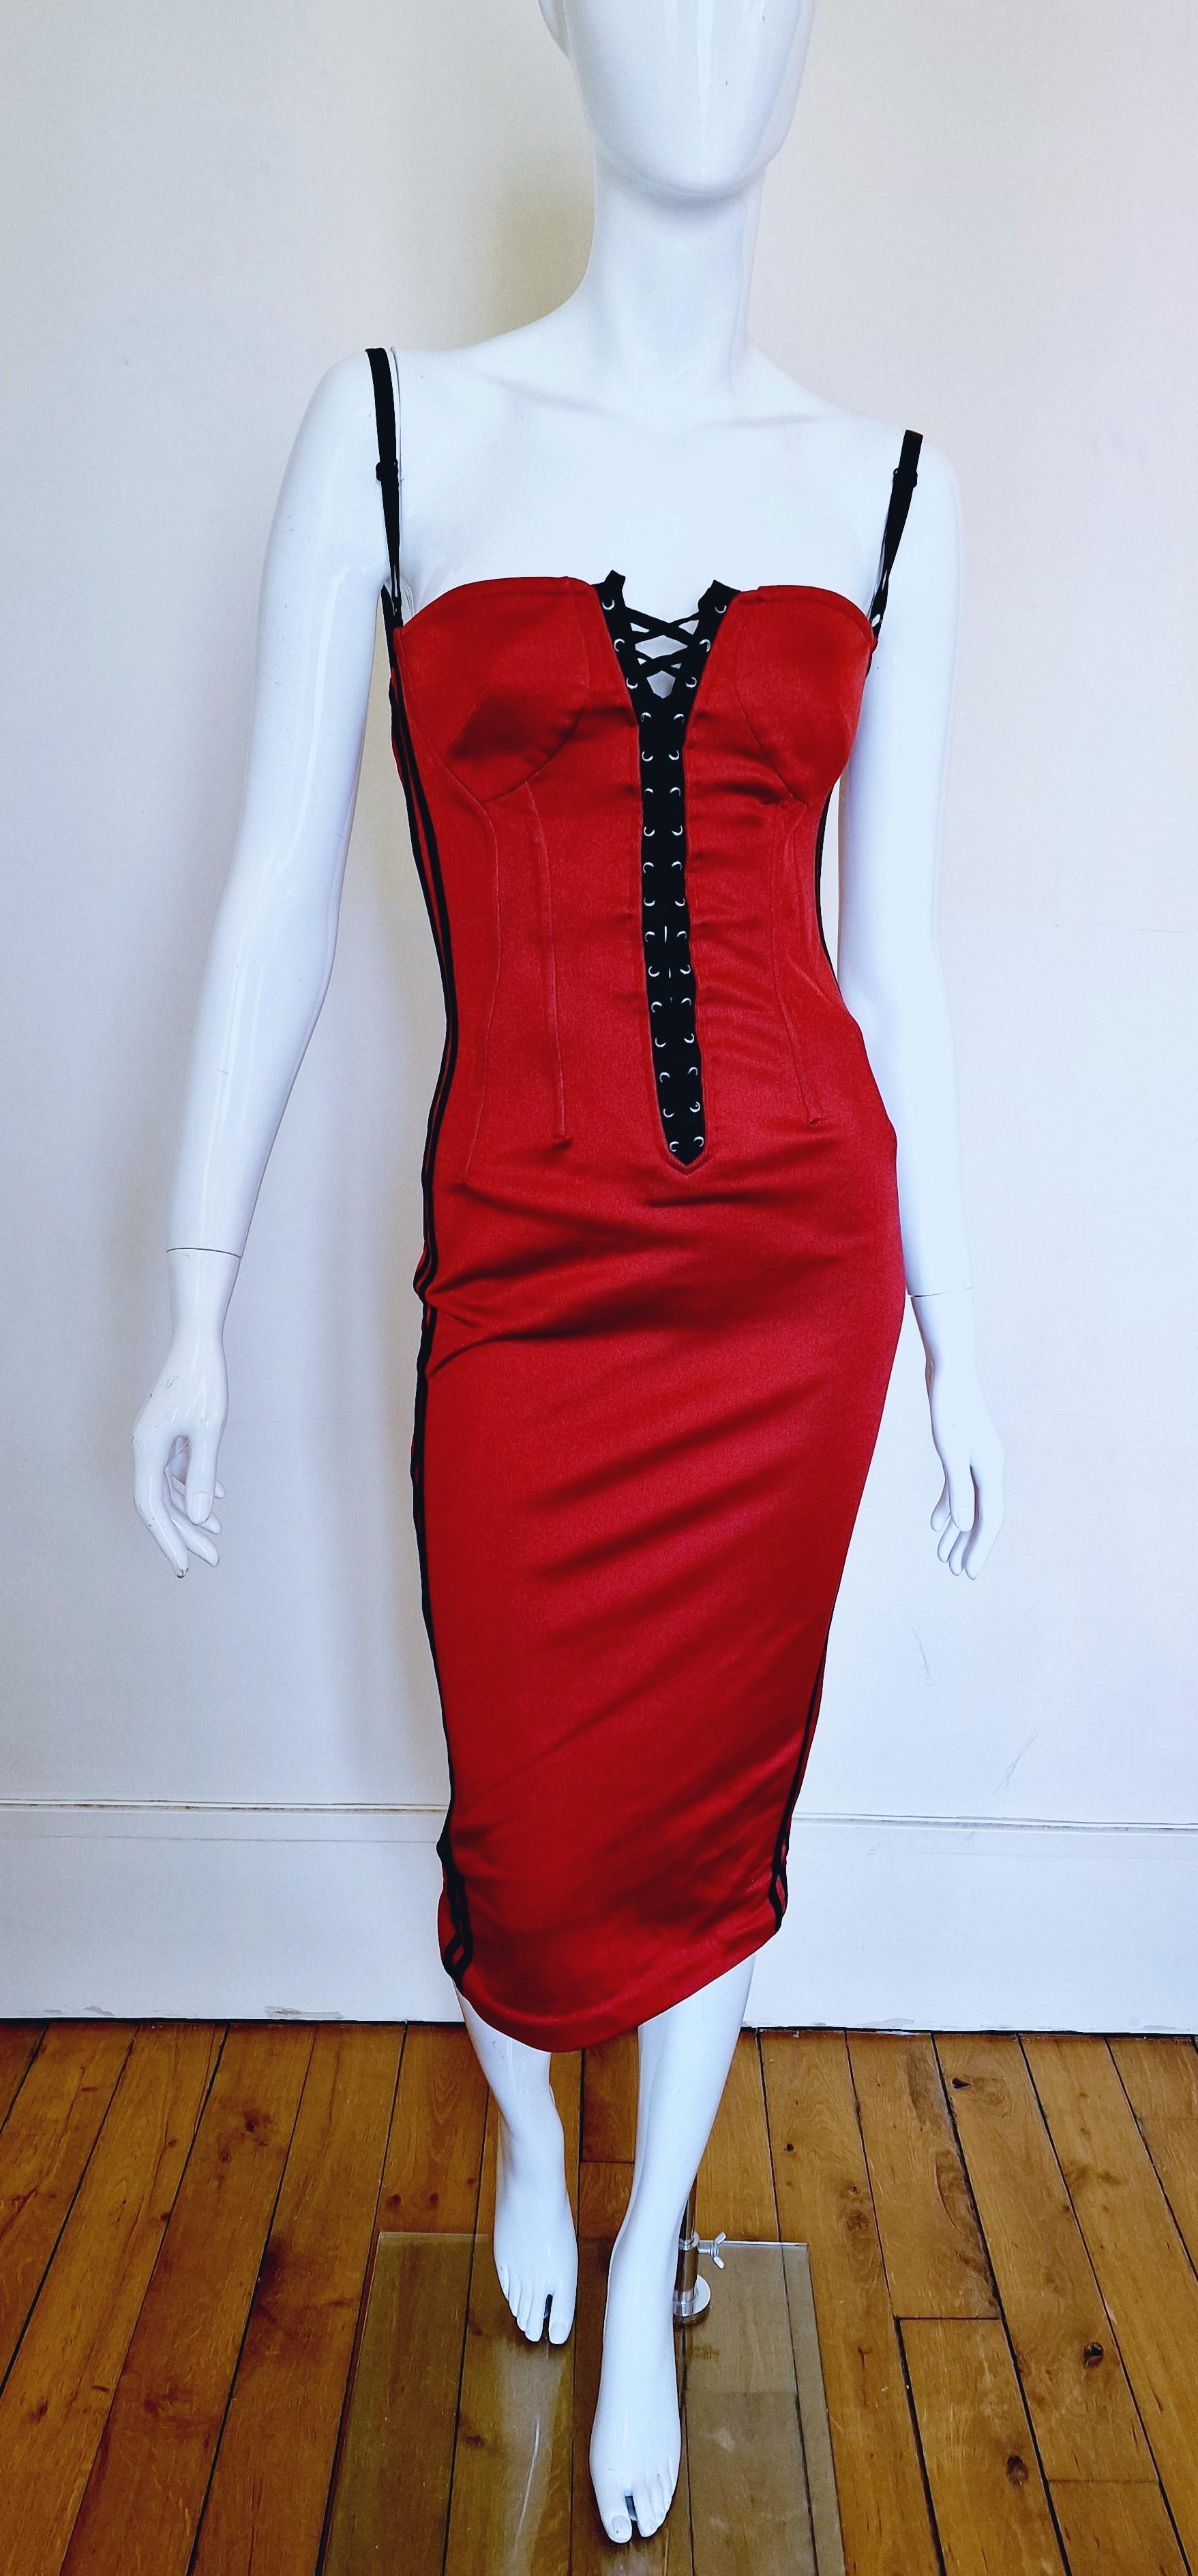 Radio corset dress by Dolce and Gabbana!
Lace up on the font and the back also!
Full body lace-up corset on the back!
2 pockets. 
D&G RADIO text on a pocket!

EXCELLENT condition!

SIZE
Fits from bigger Small to Medium.
Marked size: Italian 26/40.